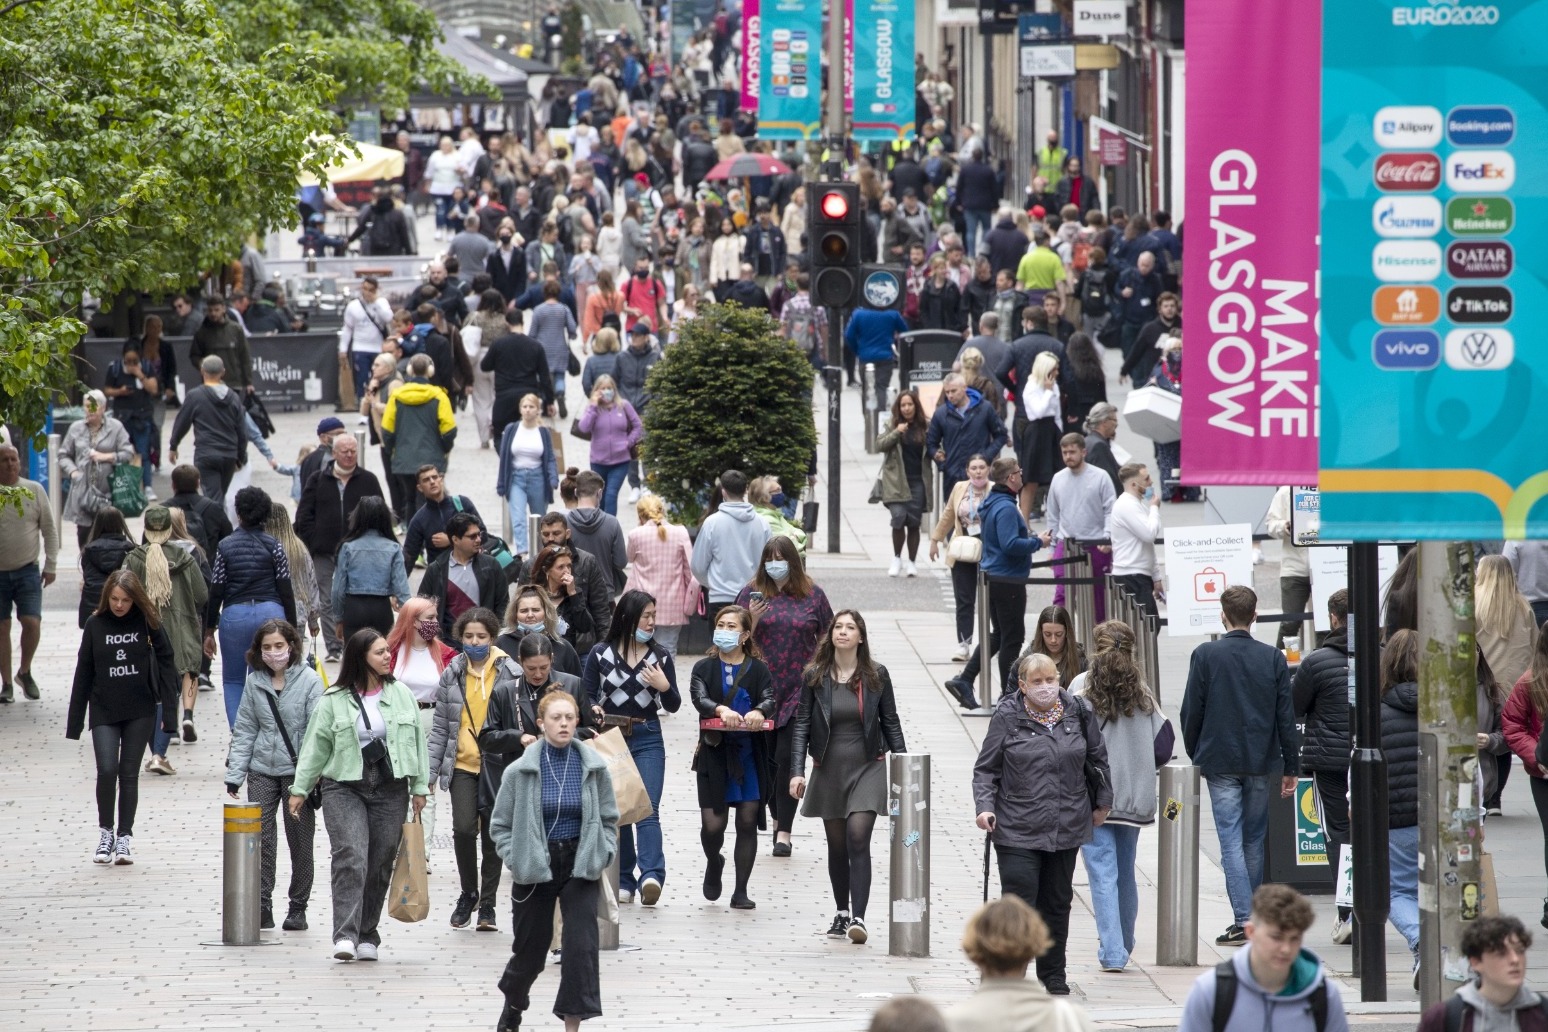 Scotland’s retail footfall growth ‘worst in UK compared to pre-pandemic levels’ 